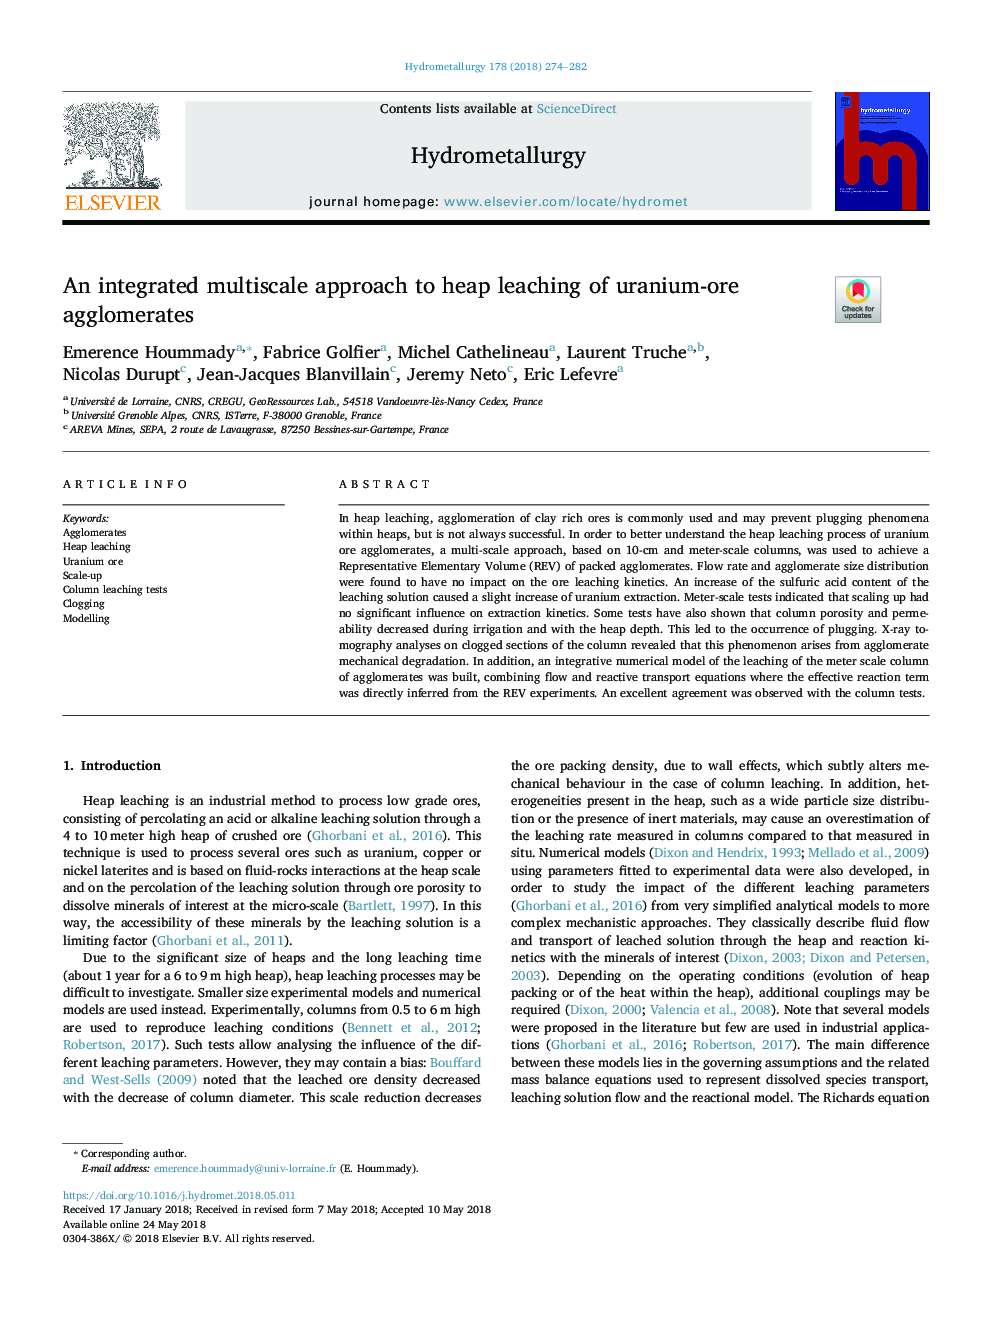 An integrated multiscale approach to heap leaching of uranium-ore agglomerates